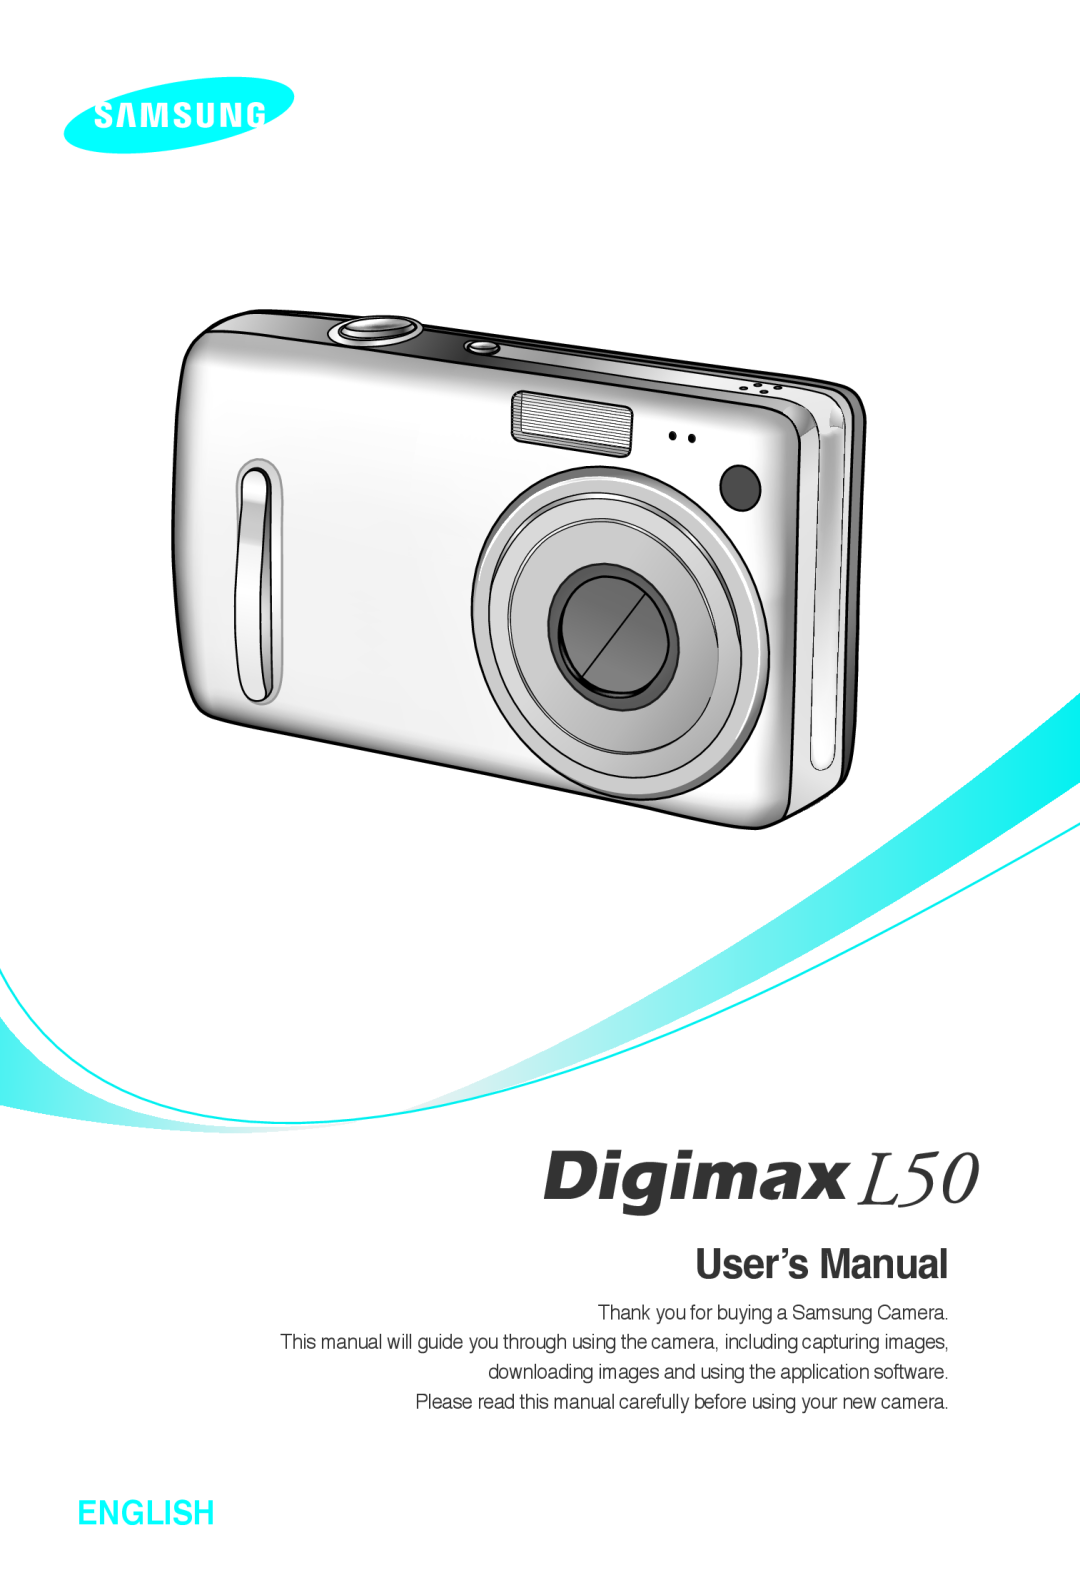 Samsung L50 user manual User’s Manual, English, Please read this manual carefully before using your new camera 